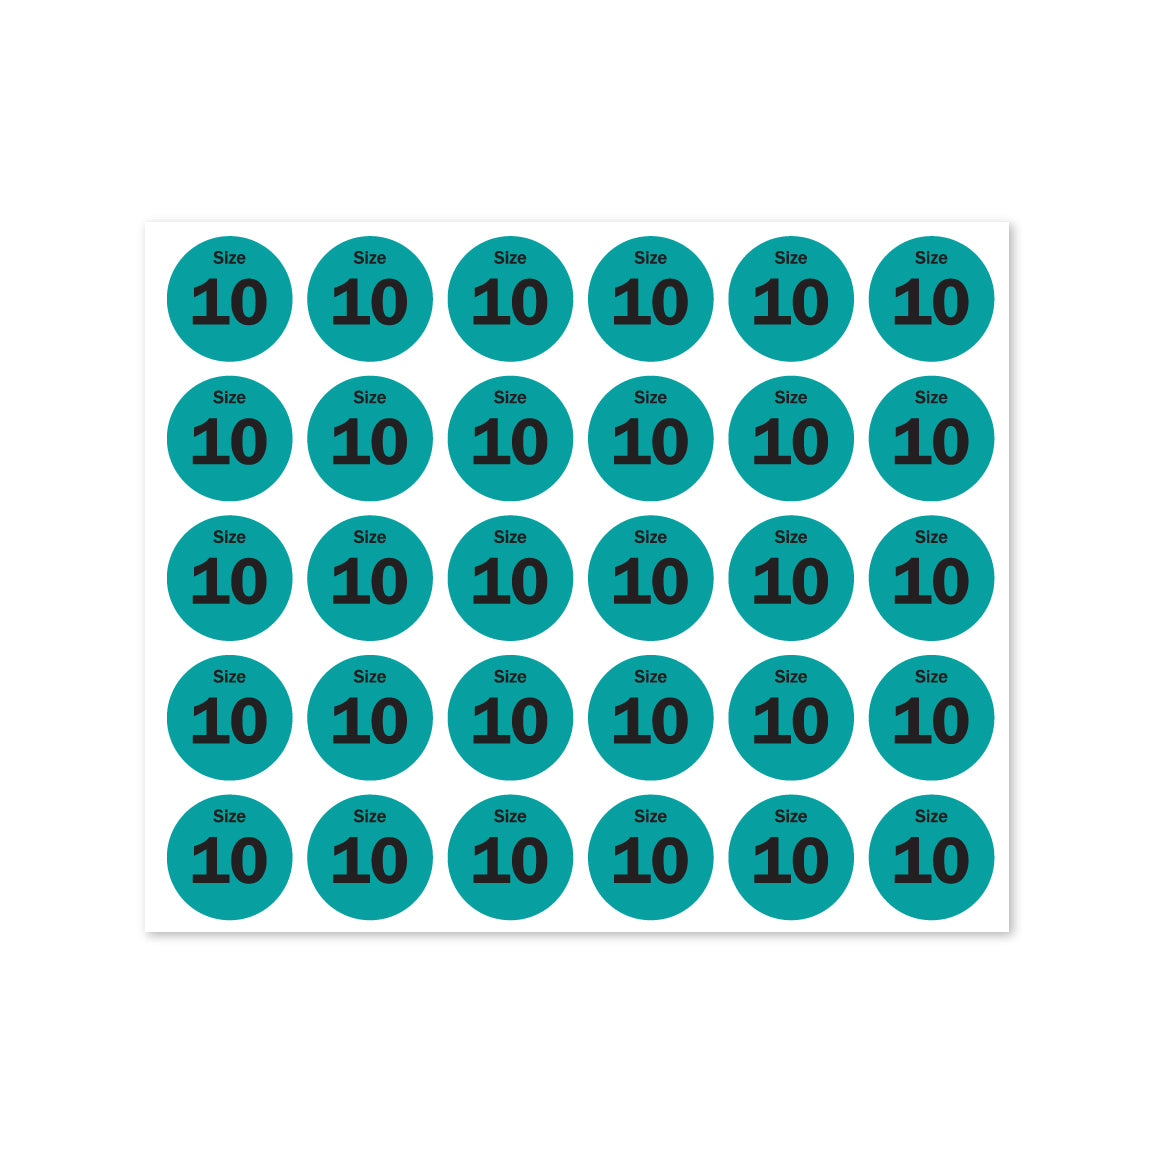 0.75 inch | Shoe & Clothing Size: Size 10 Stickers